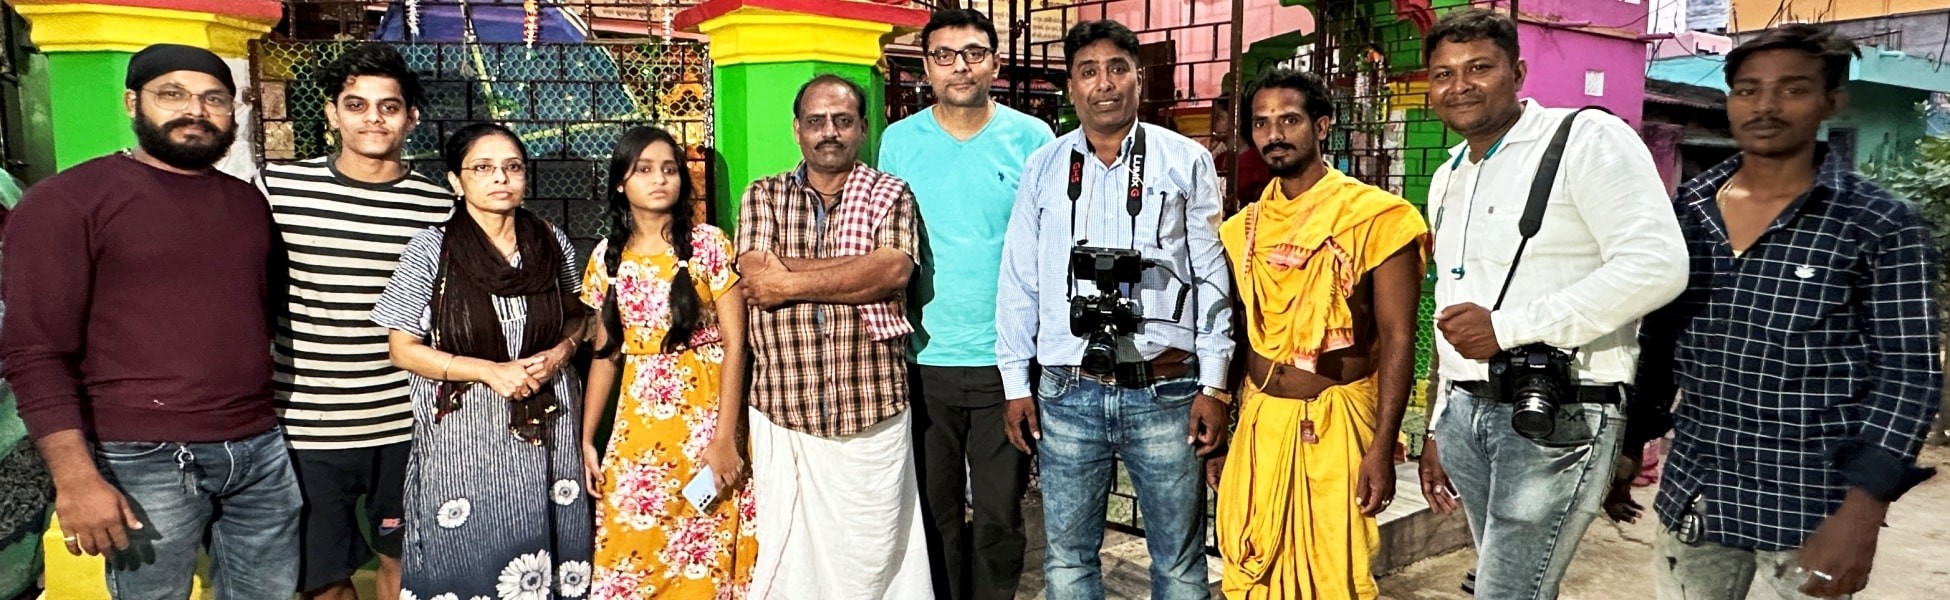 film production house in Mathura, video production house in Mathura, tv production house in Mathura, production house in Mathura, film production company in Mathura, video production company in Mathura, tv production company in Mathura, production company in Mathura